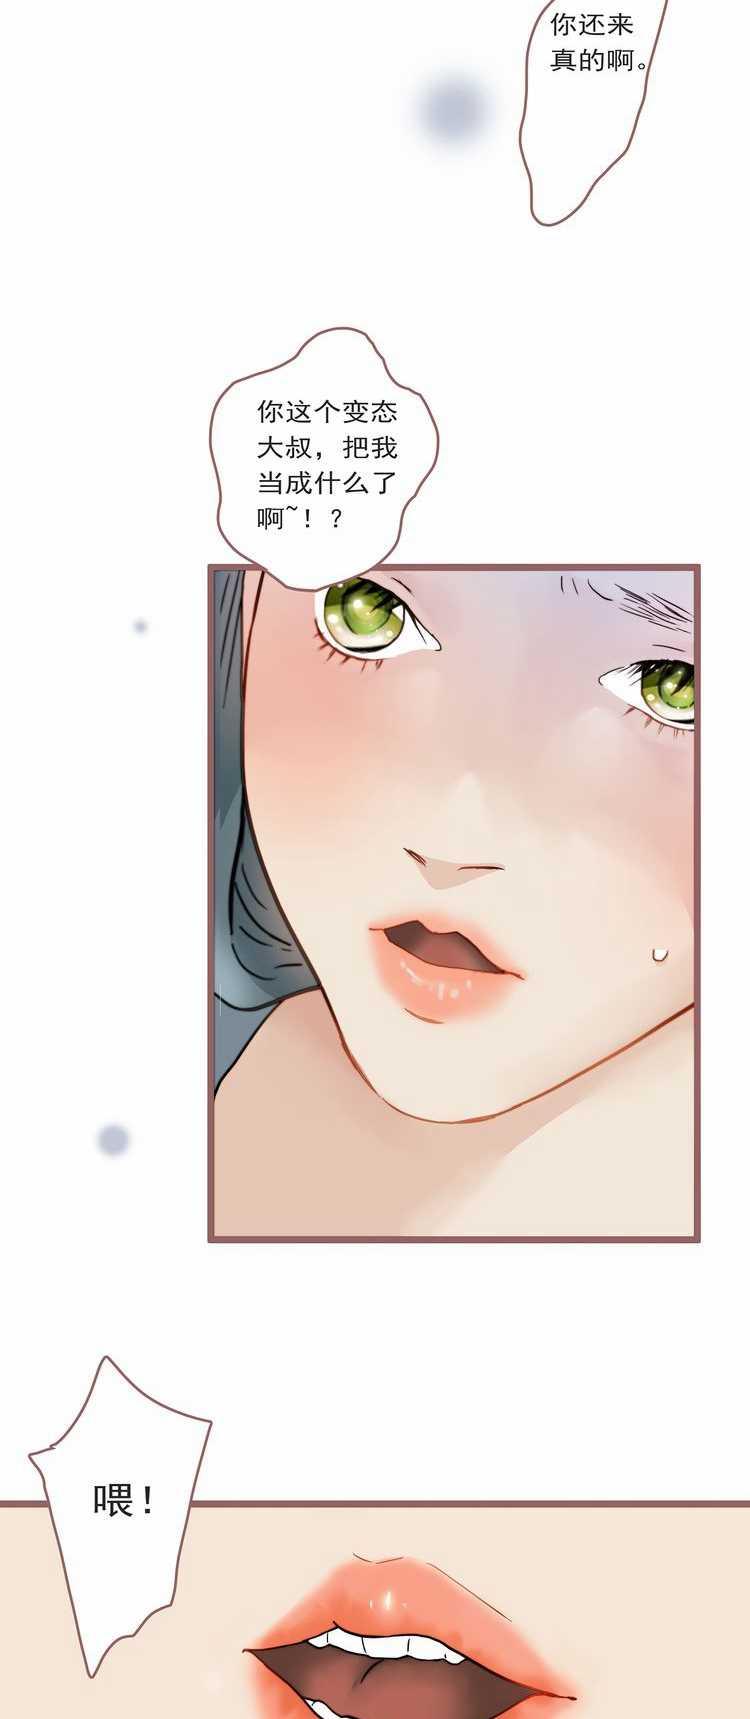 Titties 欲望人偶第四话 Shemale Sex - Page 10